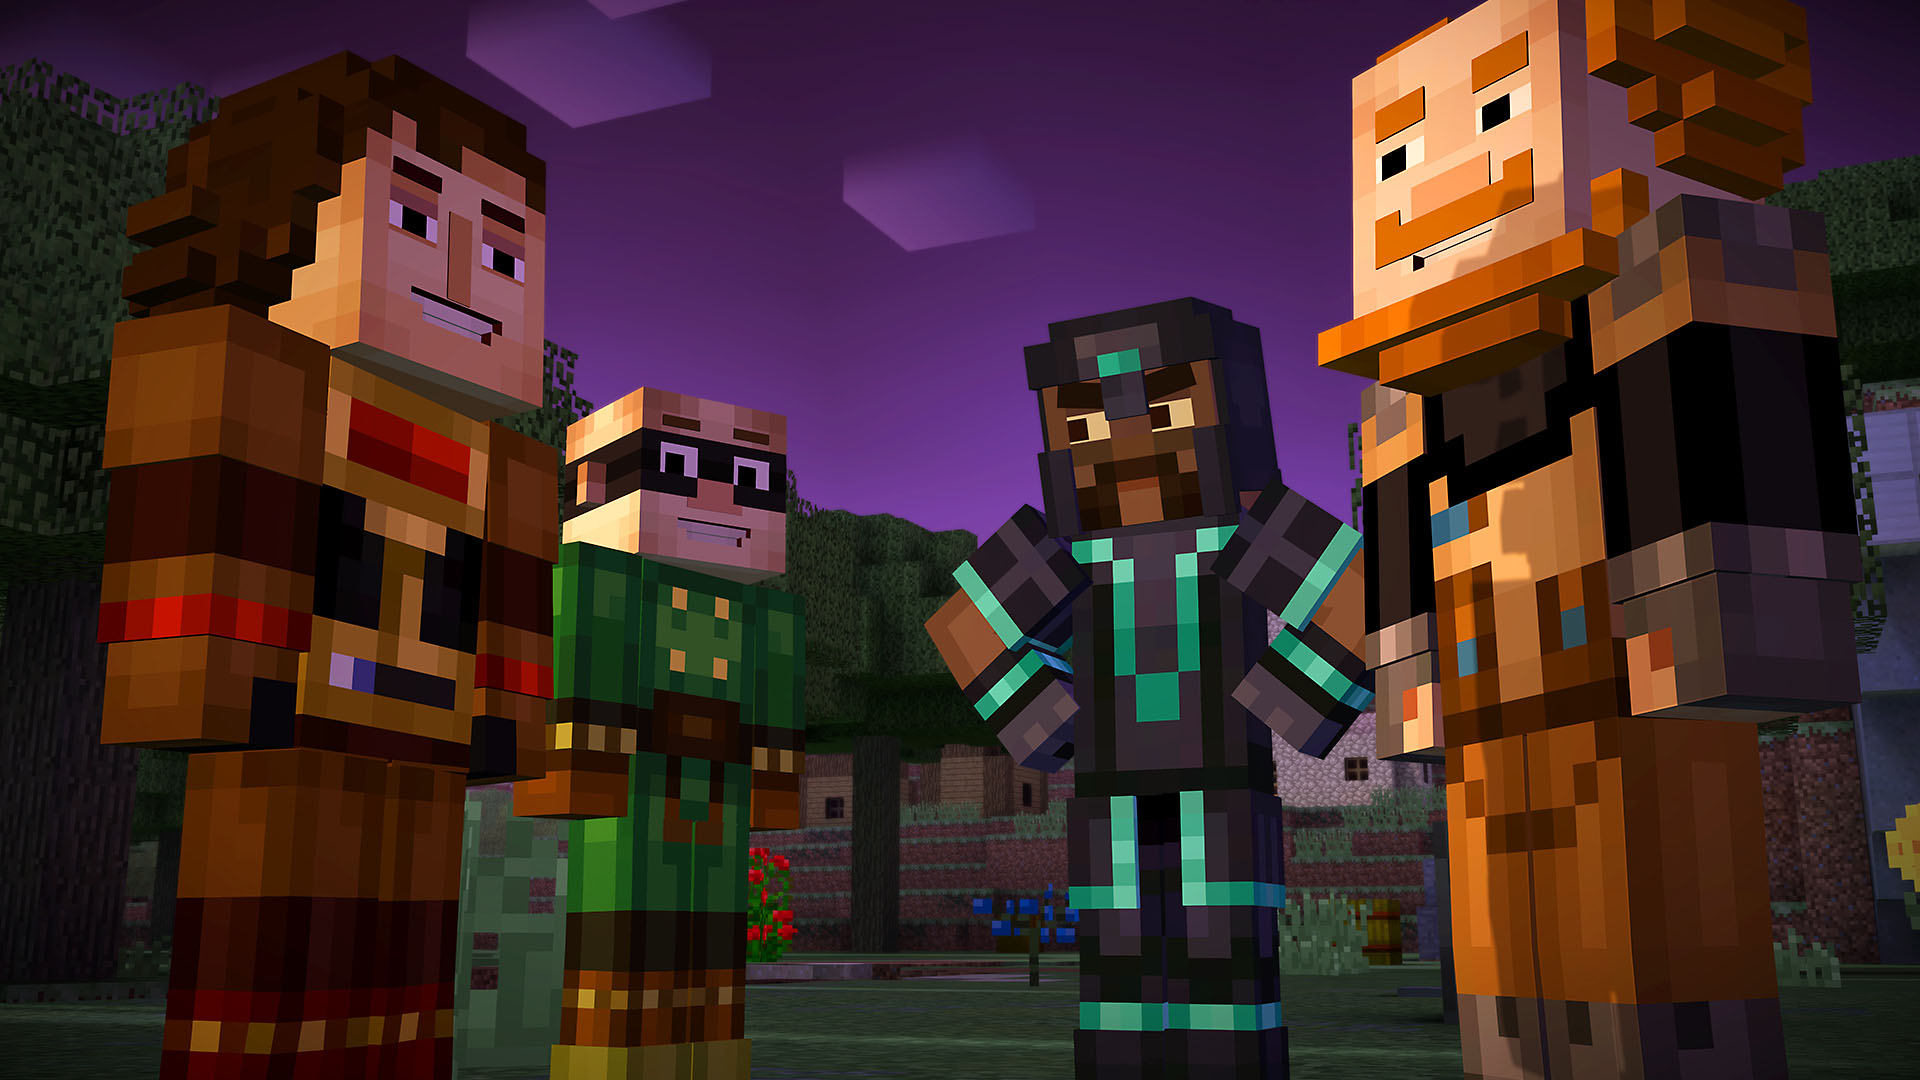 minecraft story mode free download pc full version